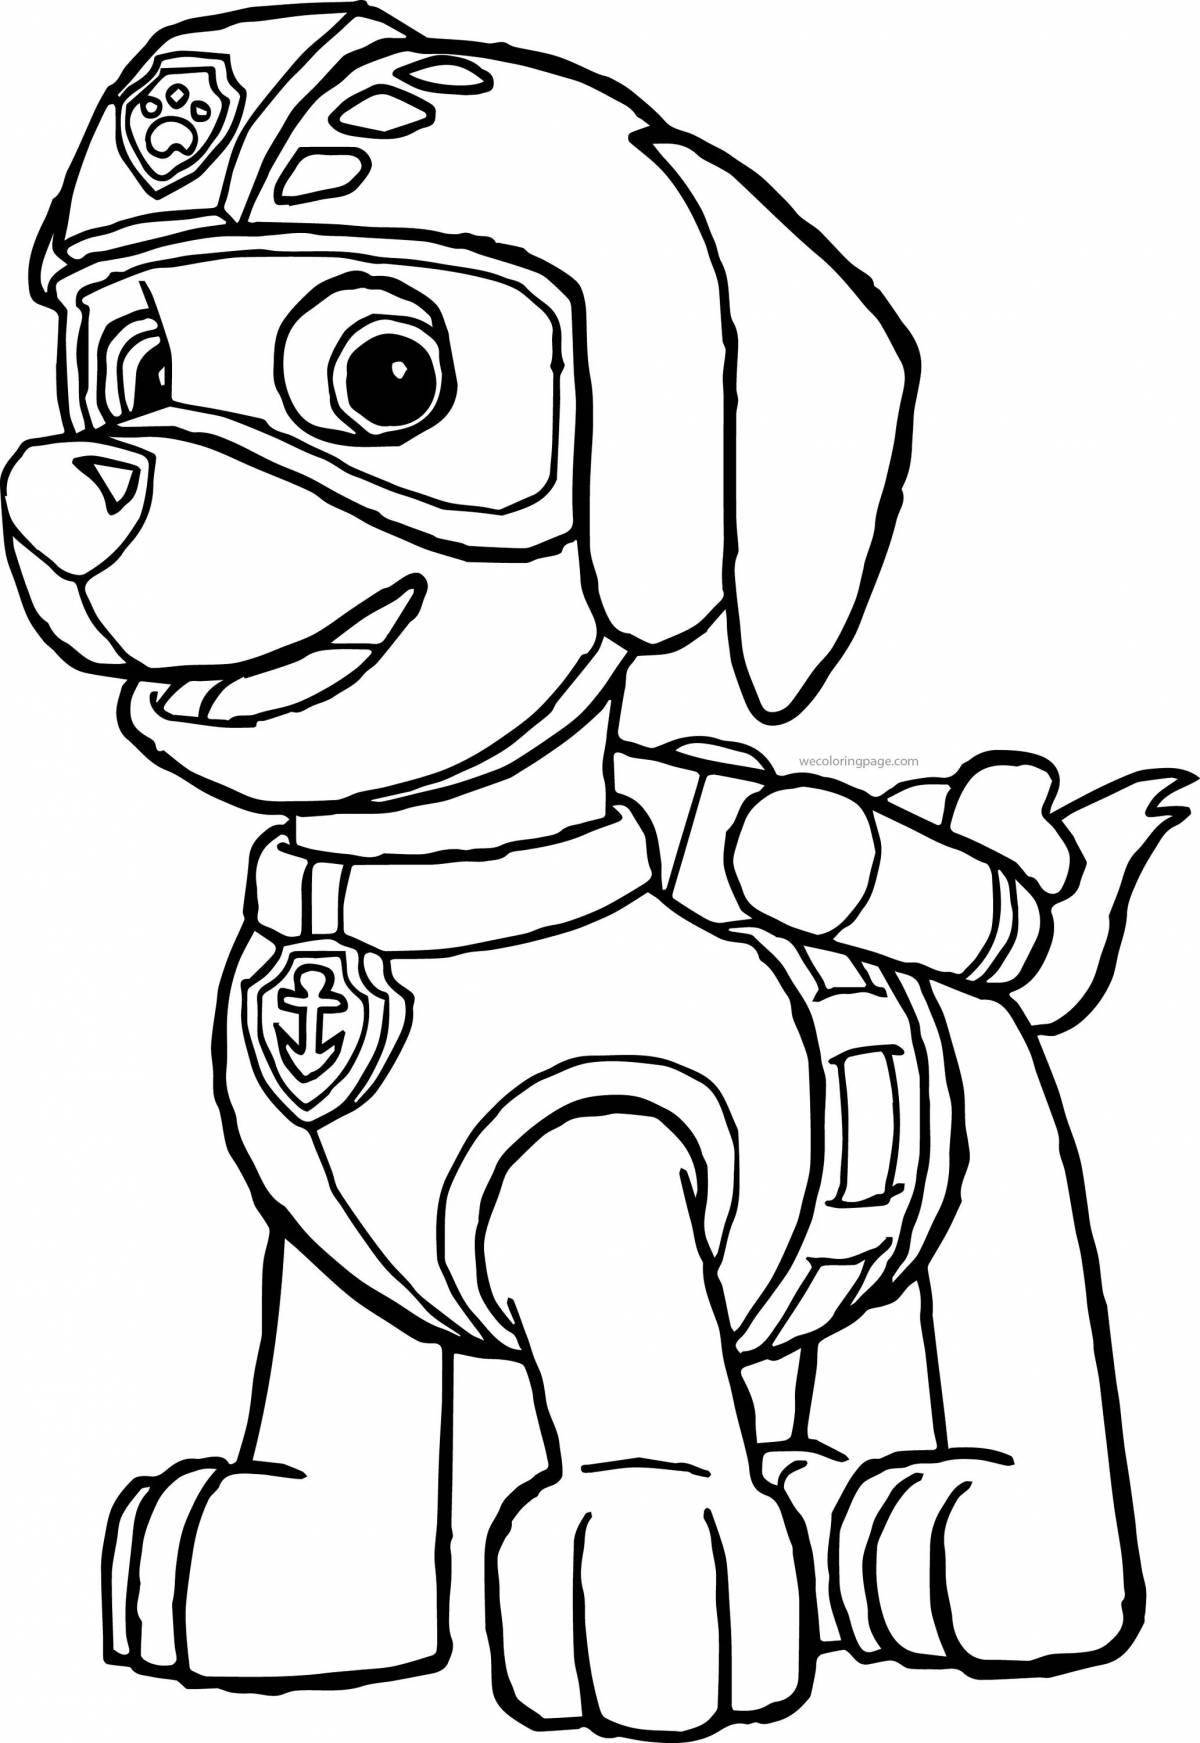 Adorable coloring page paw patrol photo